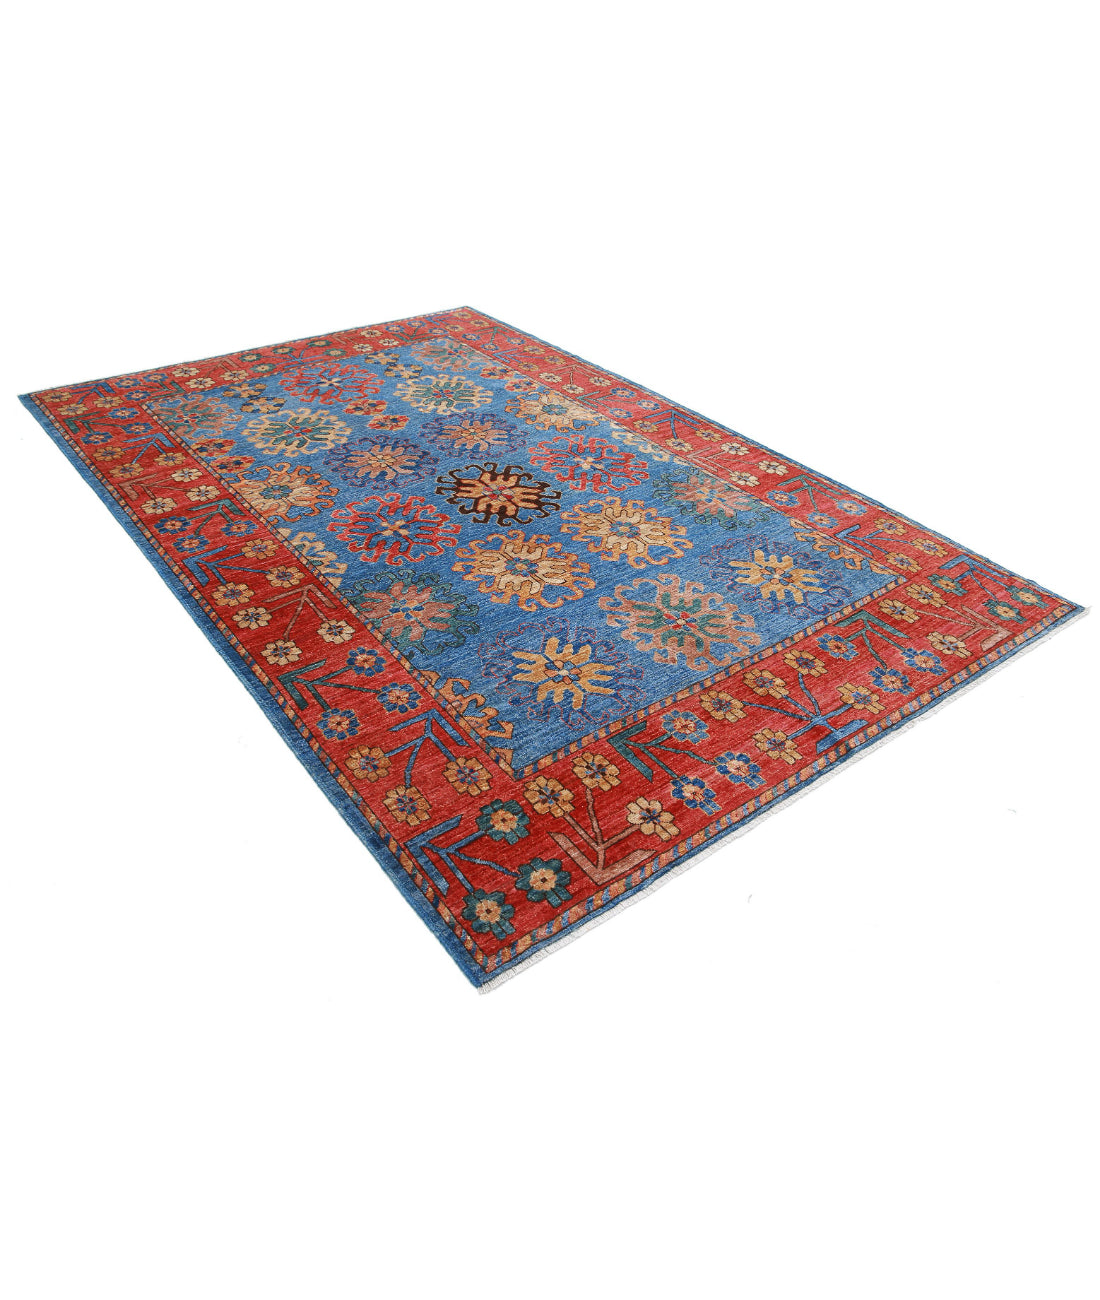 Hand Knotted Nomadic Caucasian Humna Wool Rug - 6'9'' x 10'1'' 6'9'' x 10'1'' (203 X 303) / Blue / Red